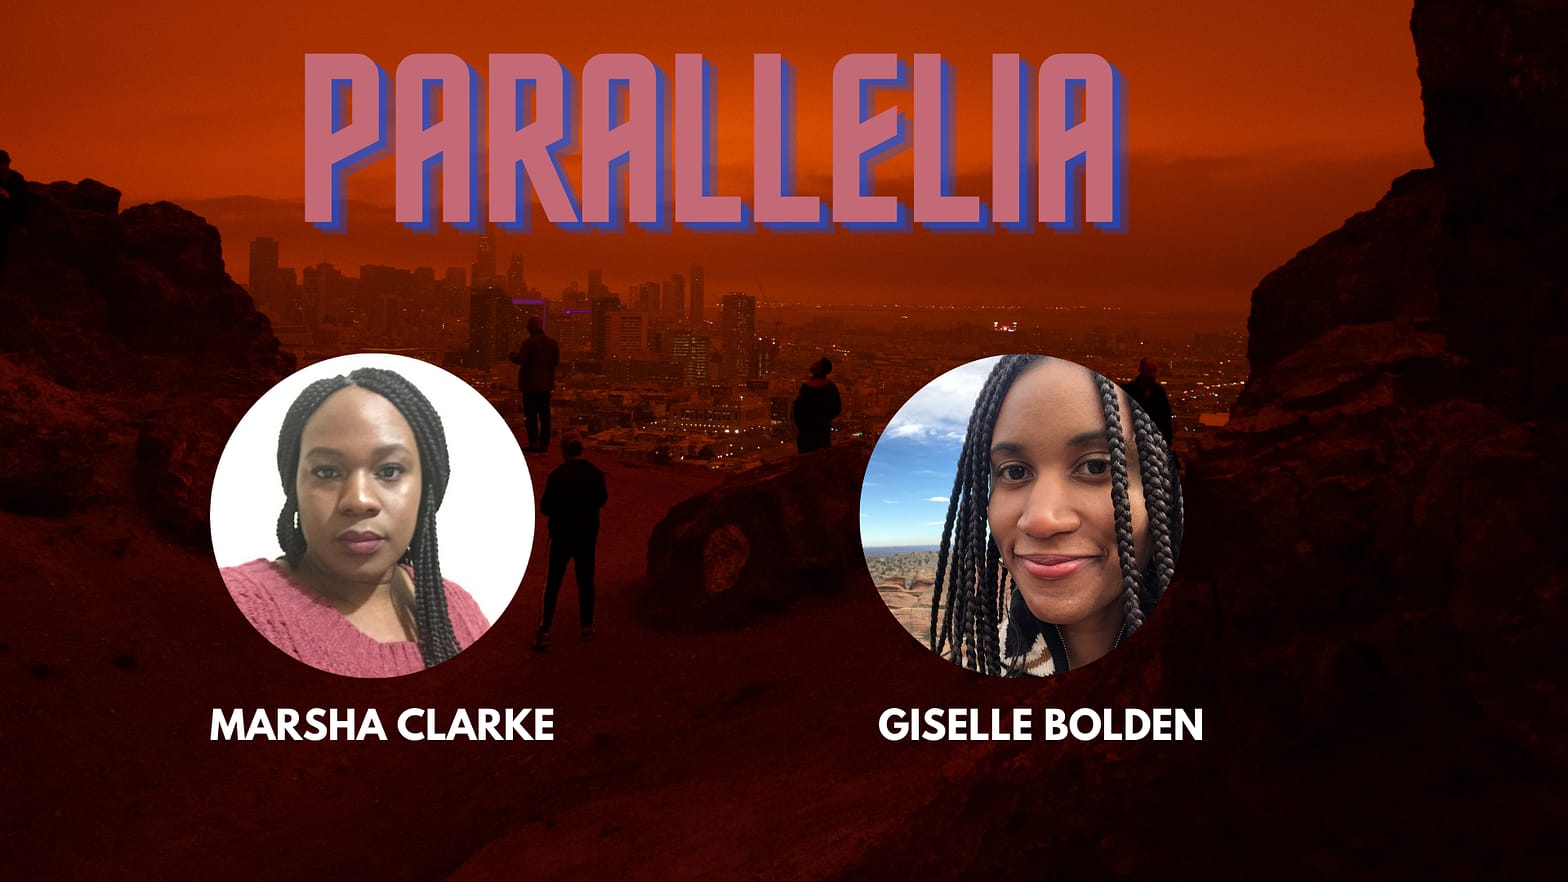 Meet The Showrunners of The Parallelia World: Marsha Clarke and Giselle Bodden